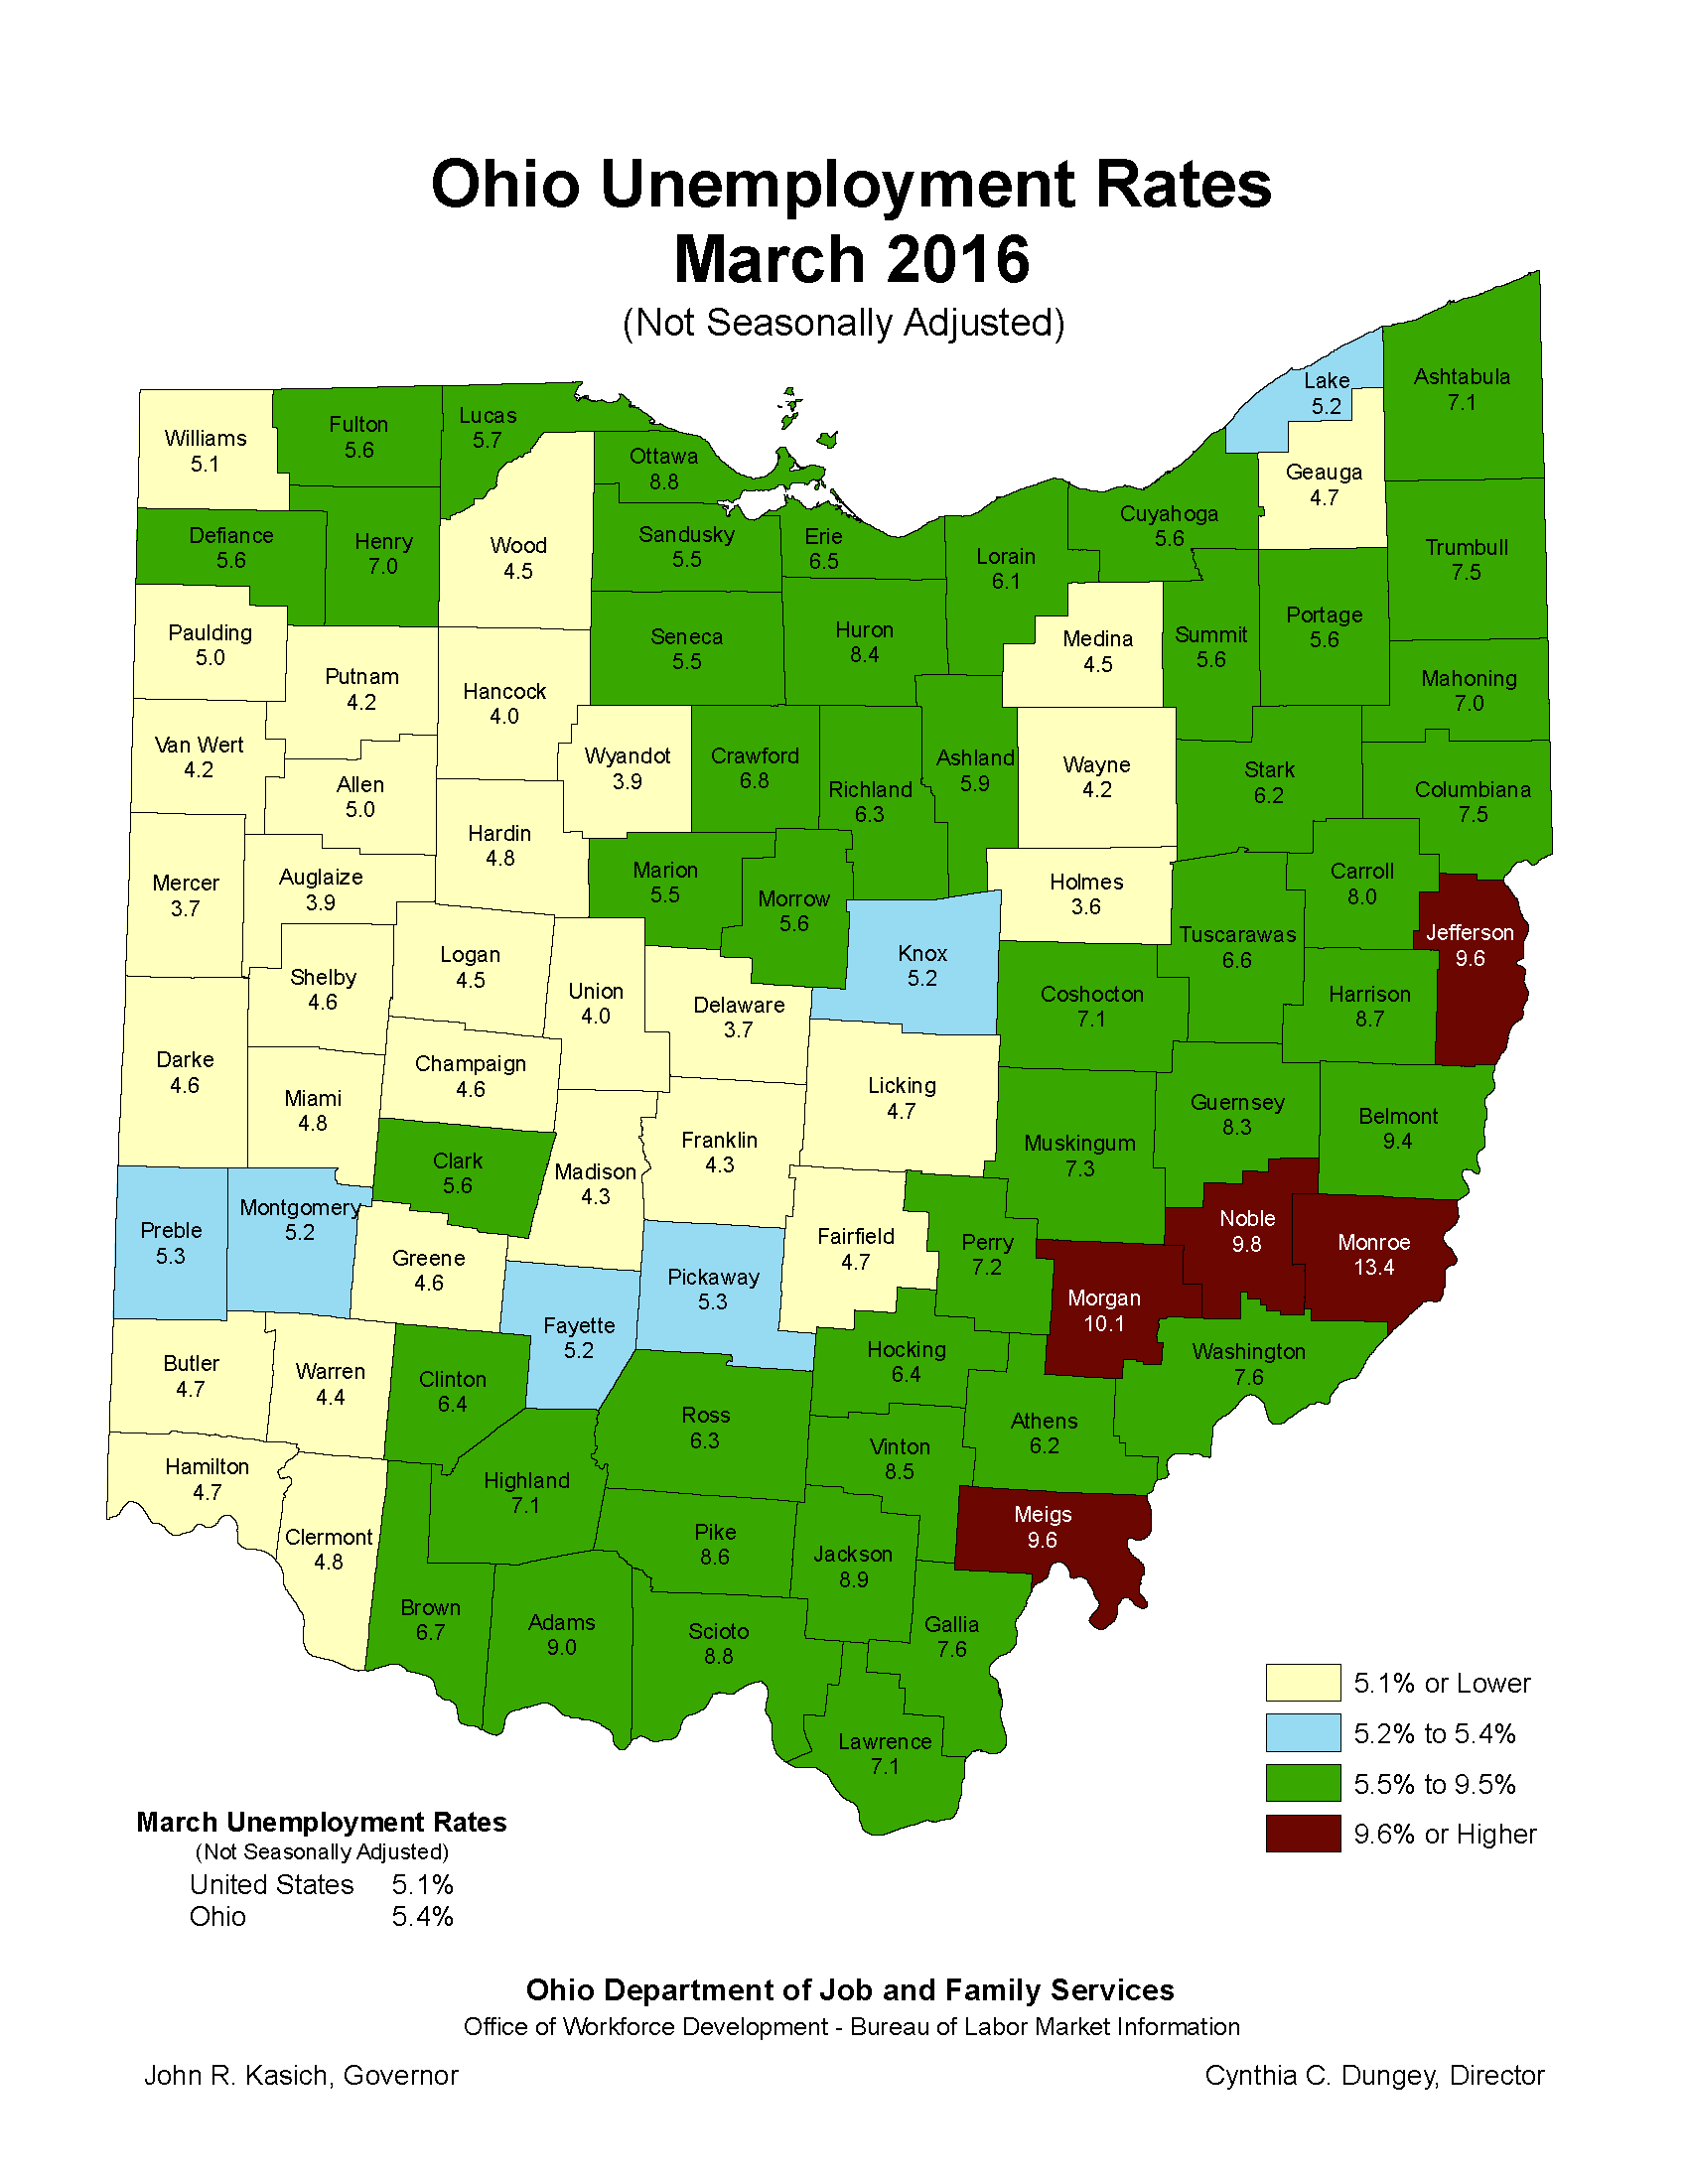 Ohio Unemployment Rates by County — Brian J. Smith, Attorney